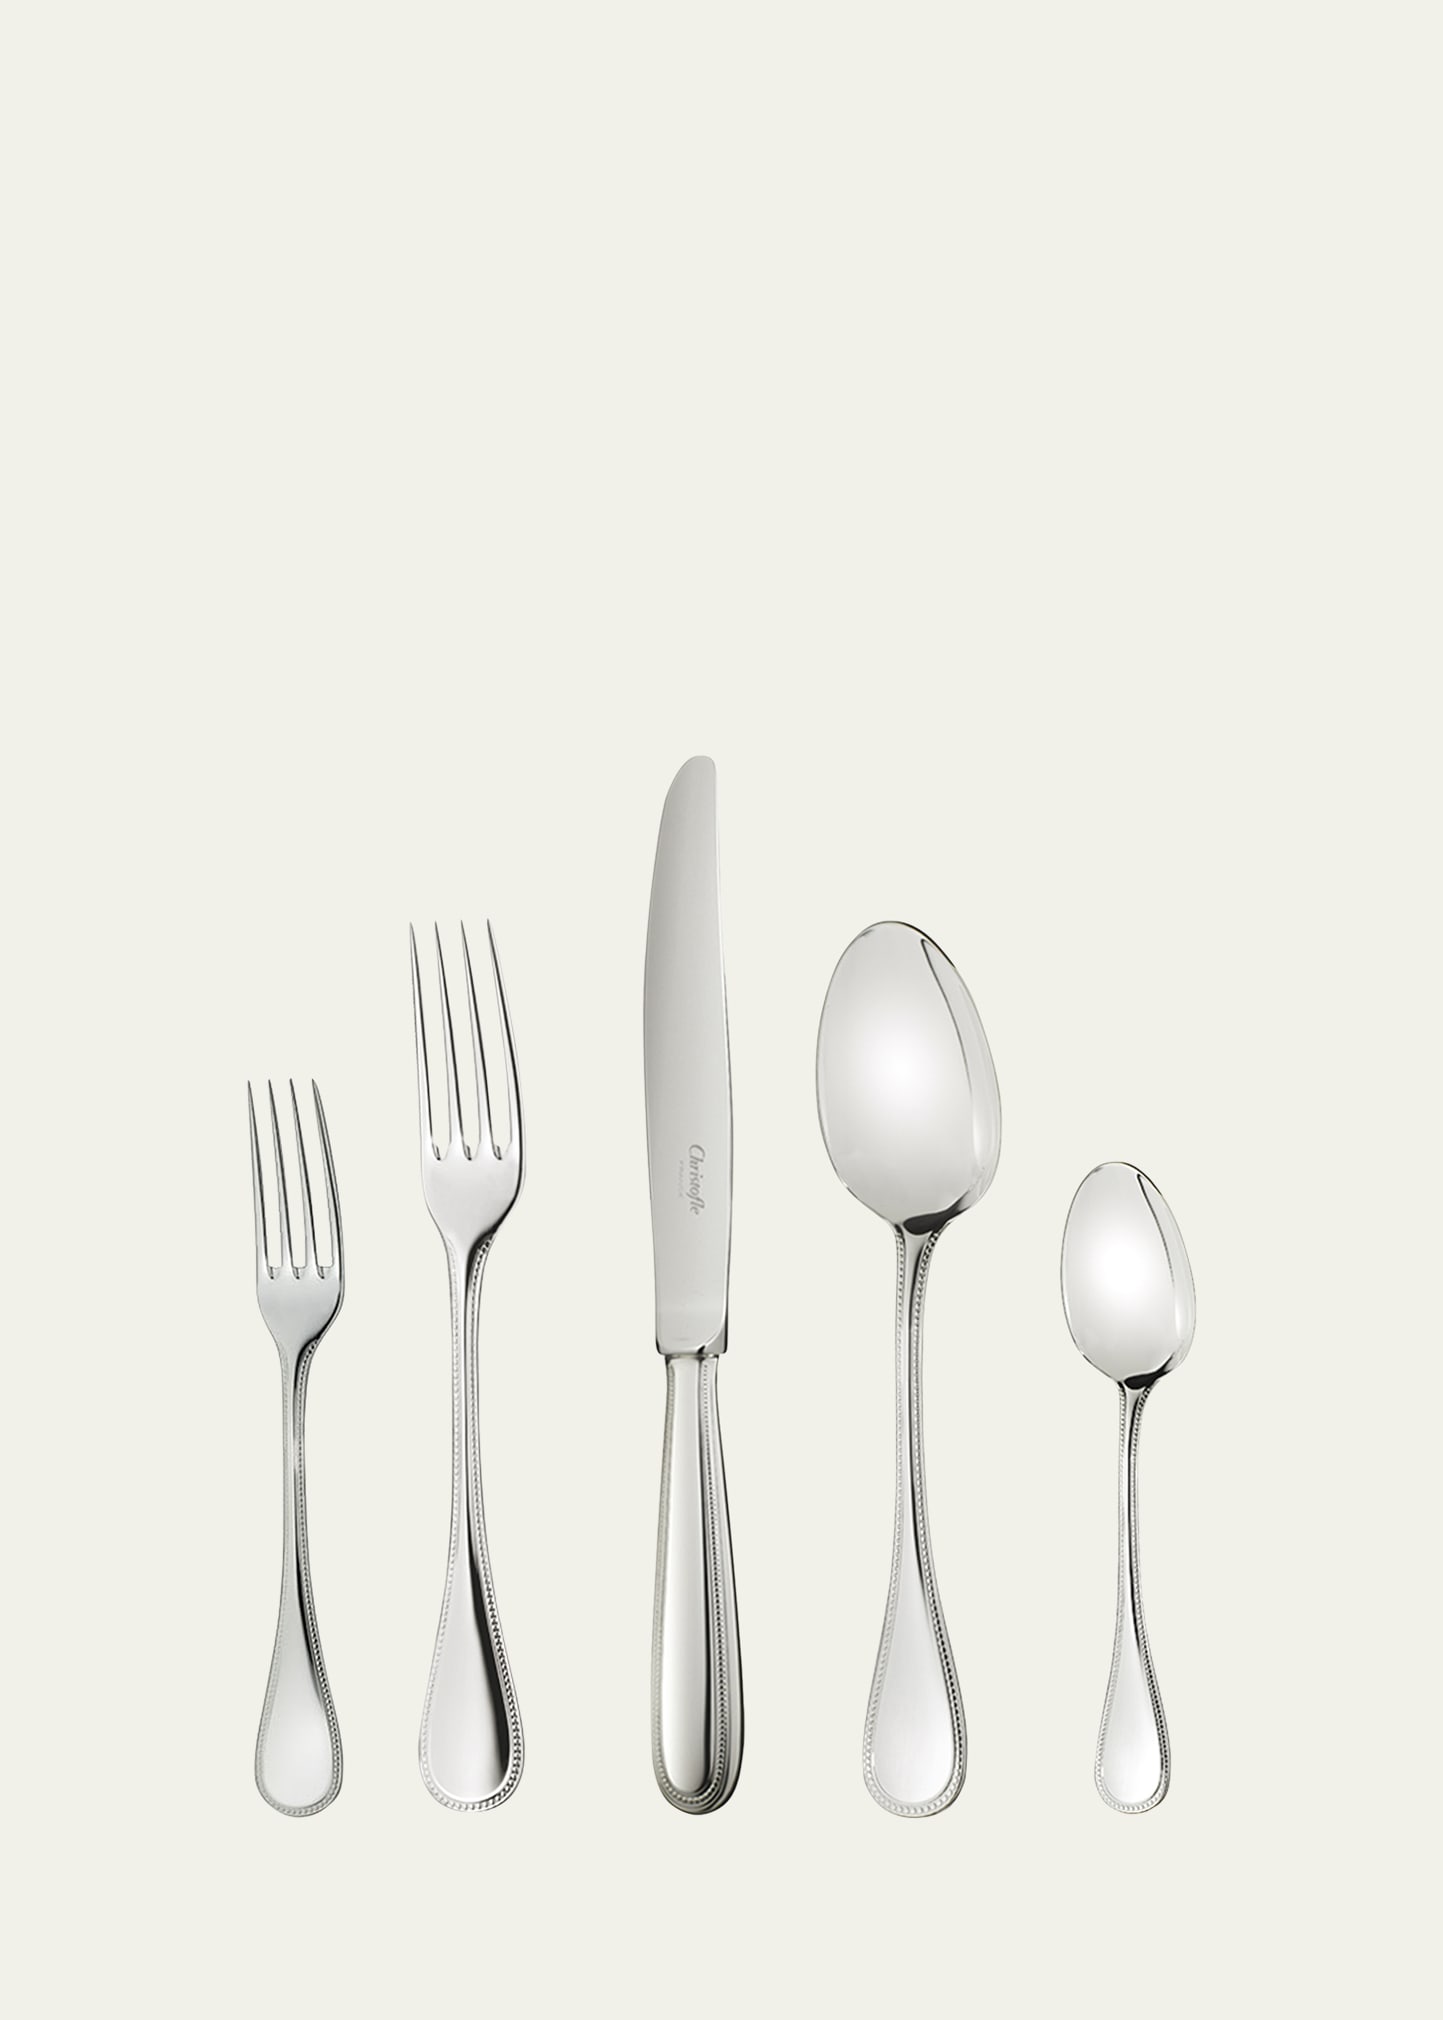 Christofle Perles 5-piece Flatware Place Setting In Gray